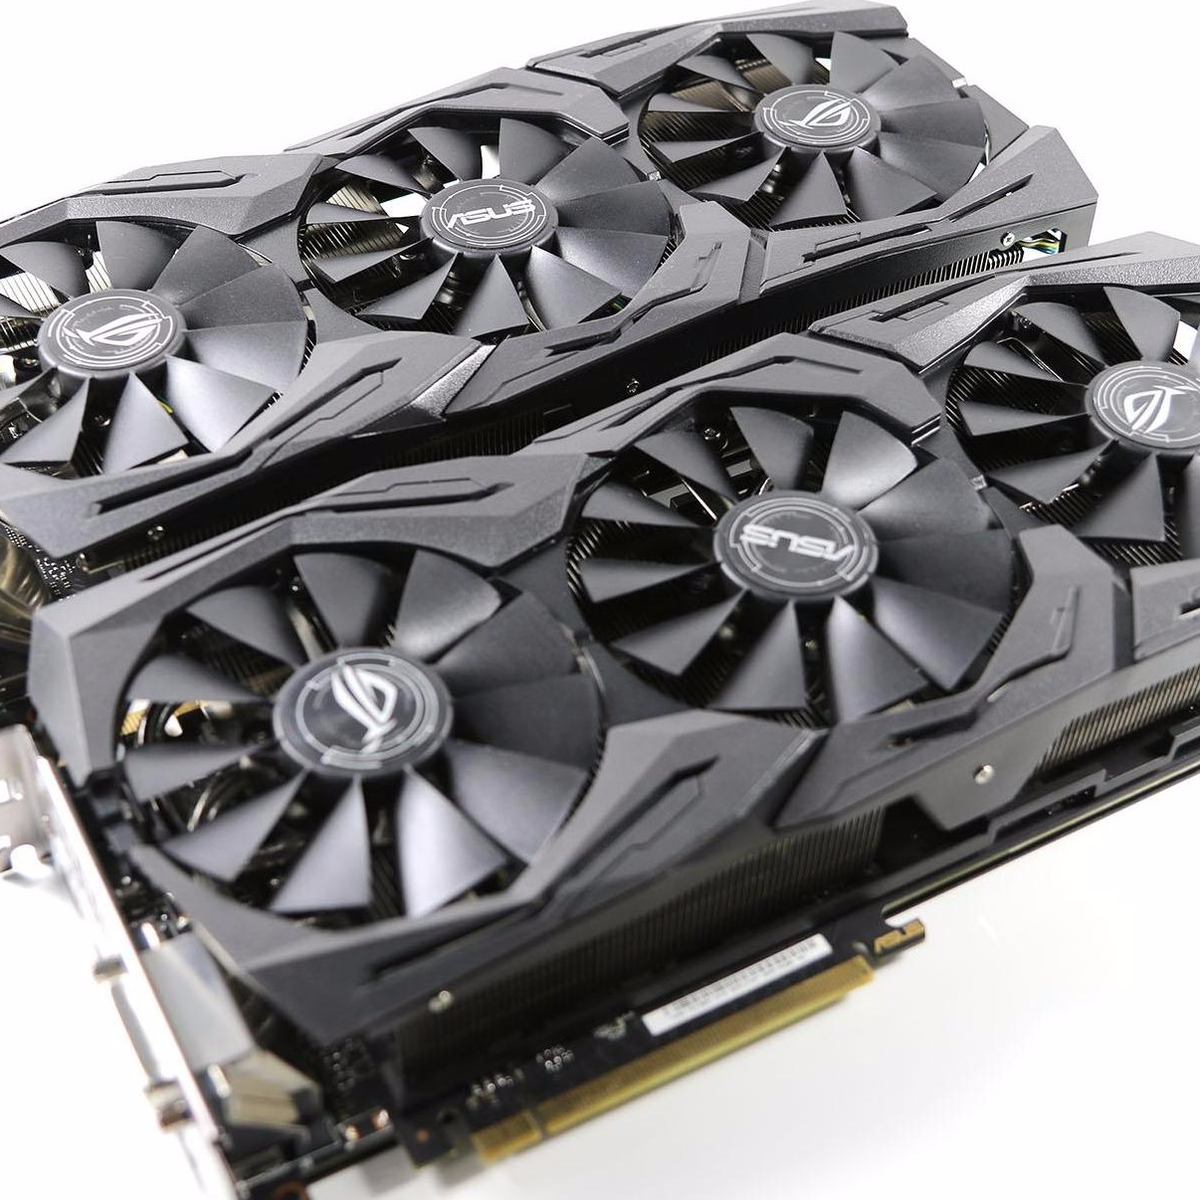 Asus Strix 1080 Ti OC review: top-tier SLI tested